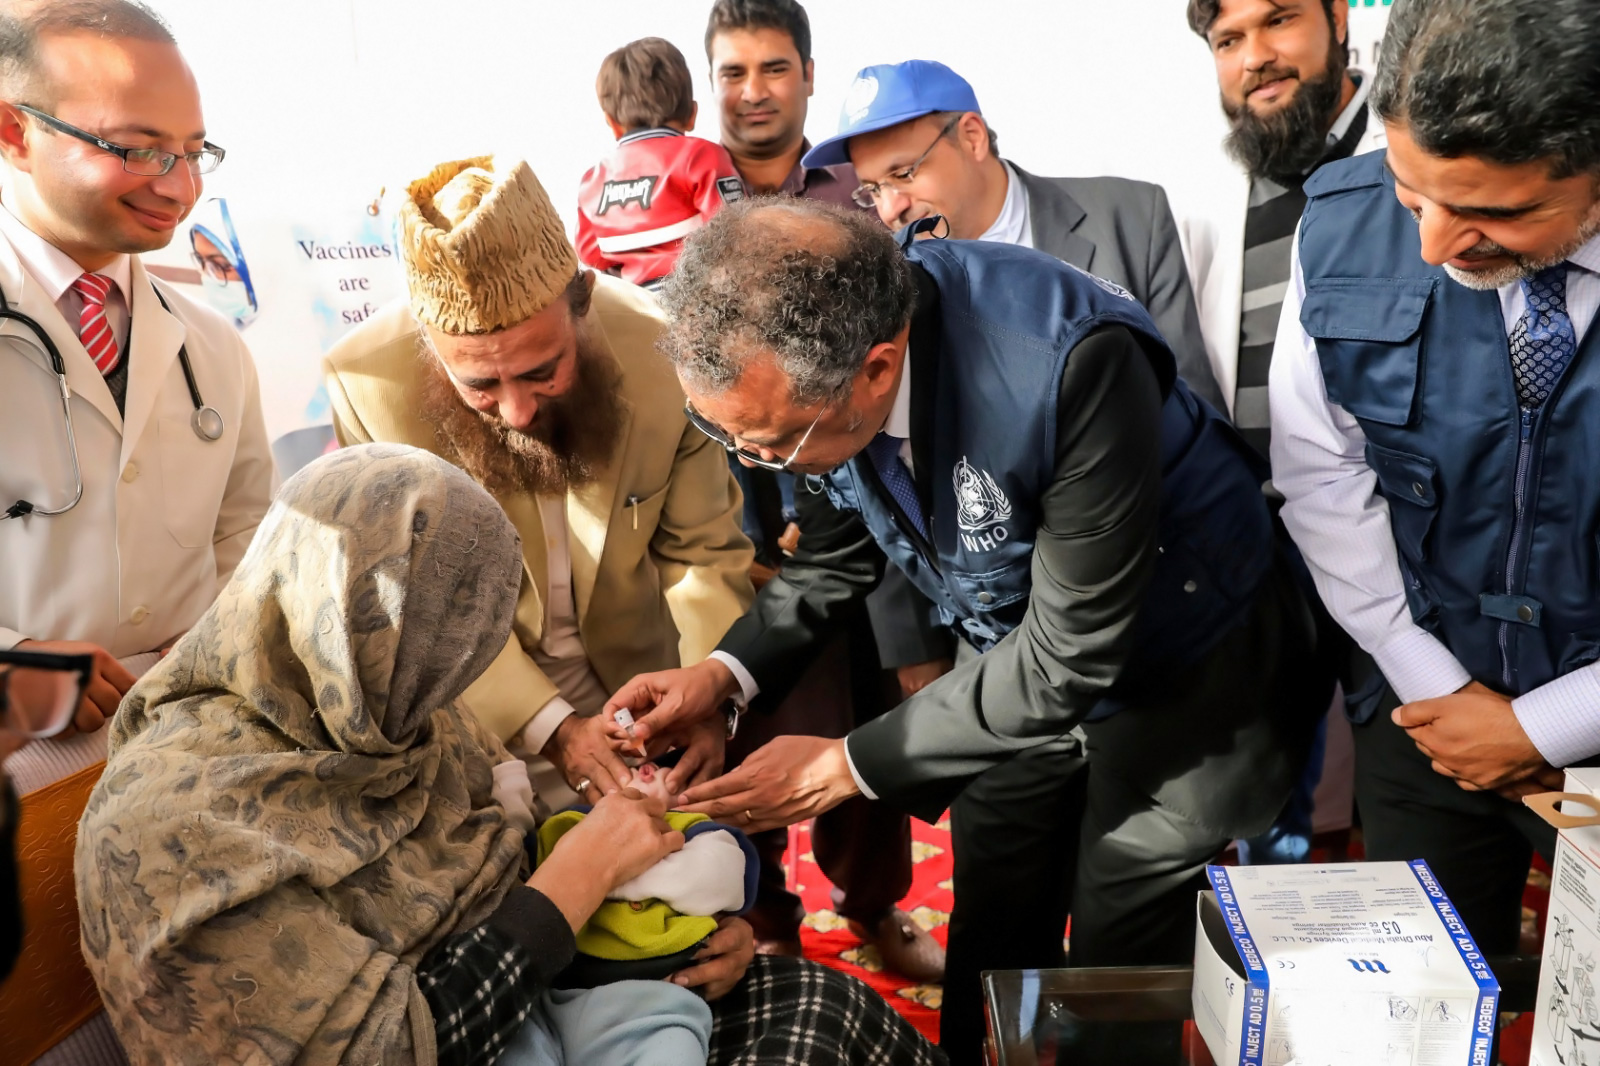 Dr Tedros Adhanom Ghebreysus, WHO Director General and Chair Polio Oversight Board, administering polio drops to a young child in Pakistan. WHO/Jinni